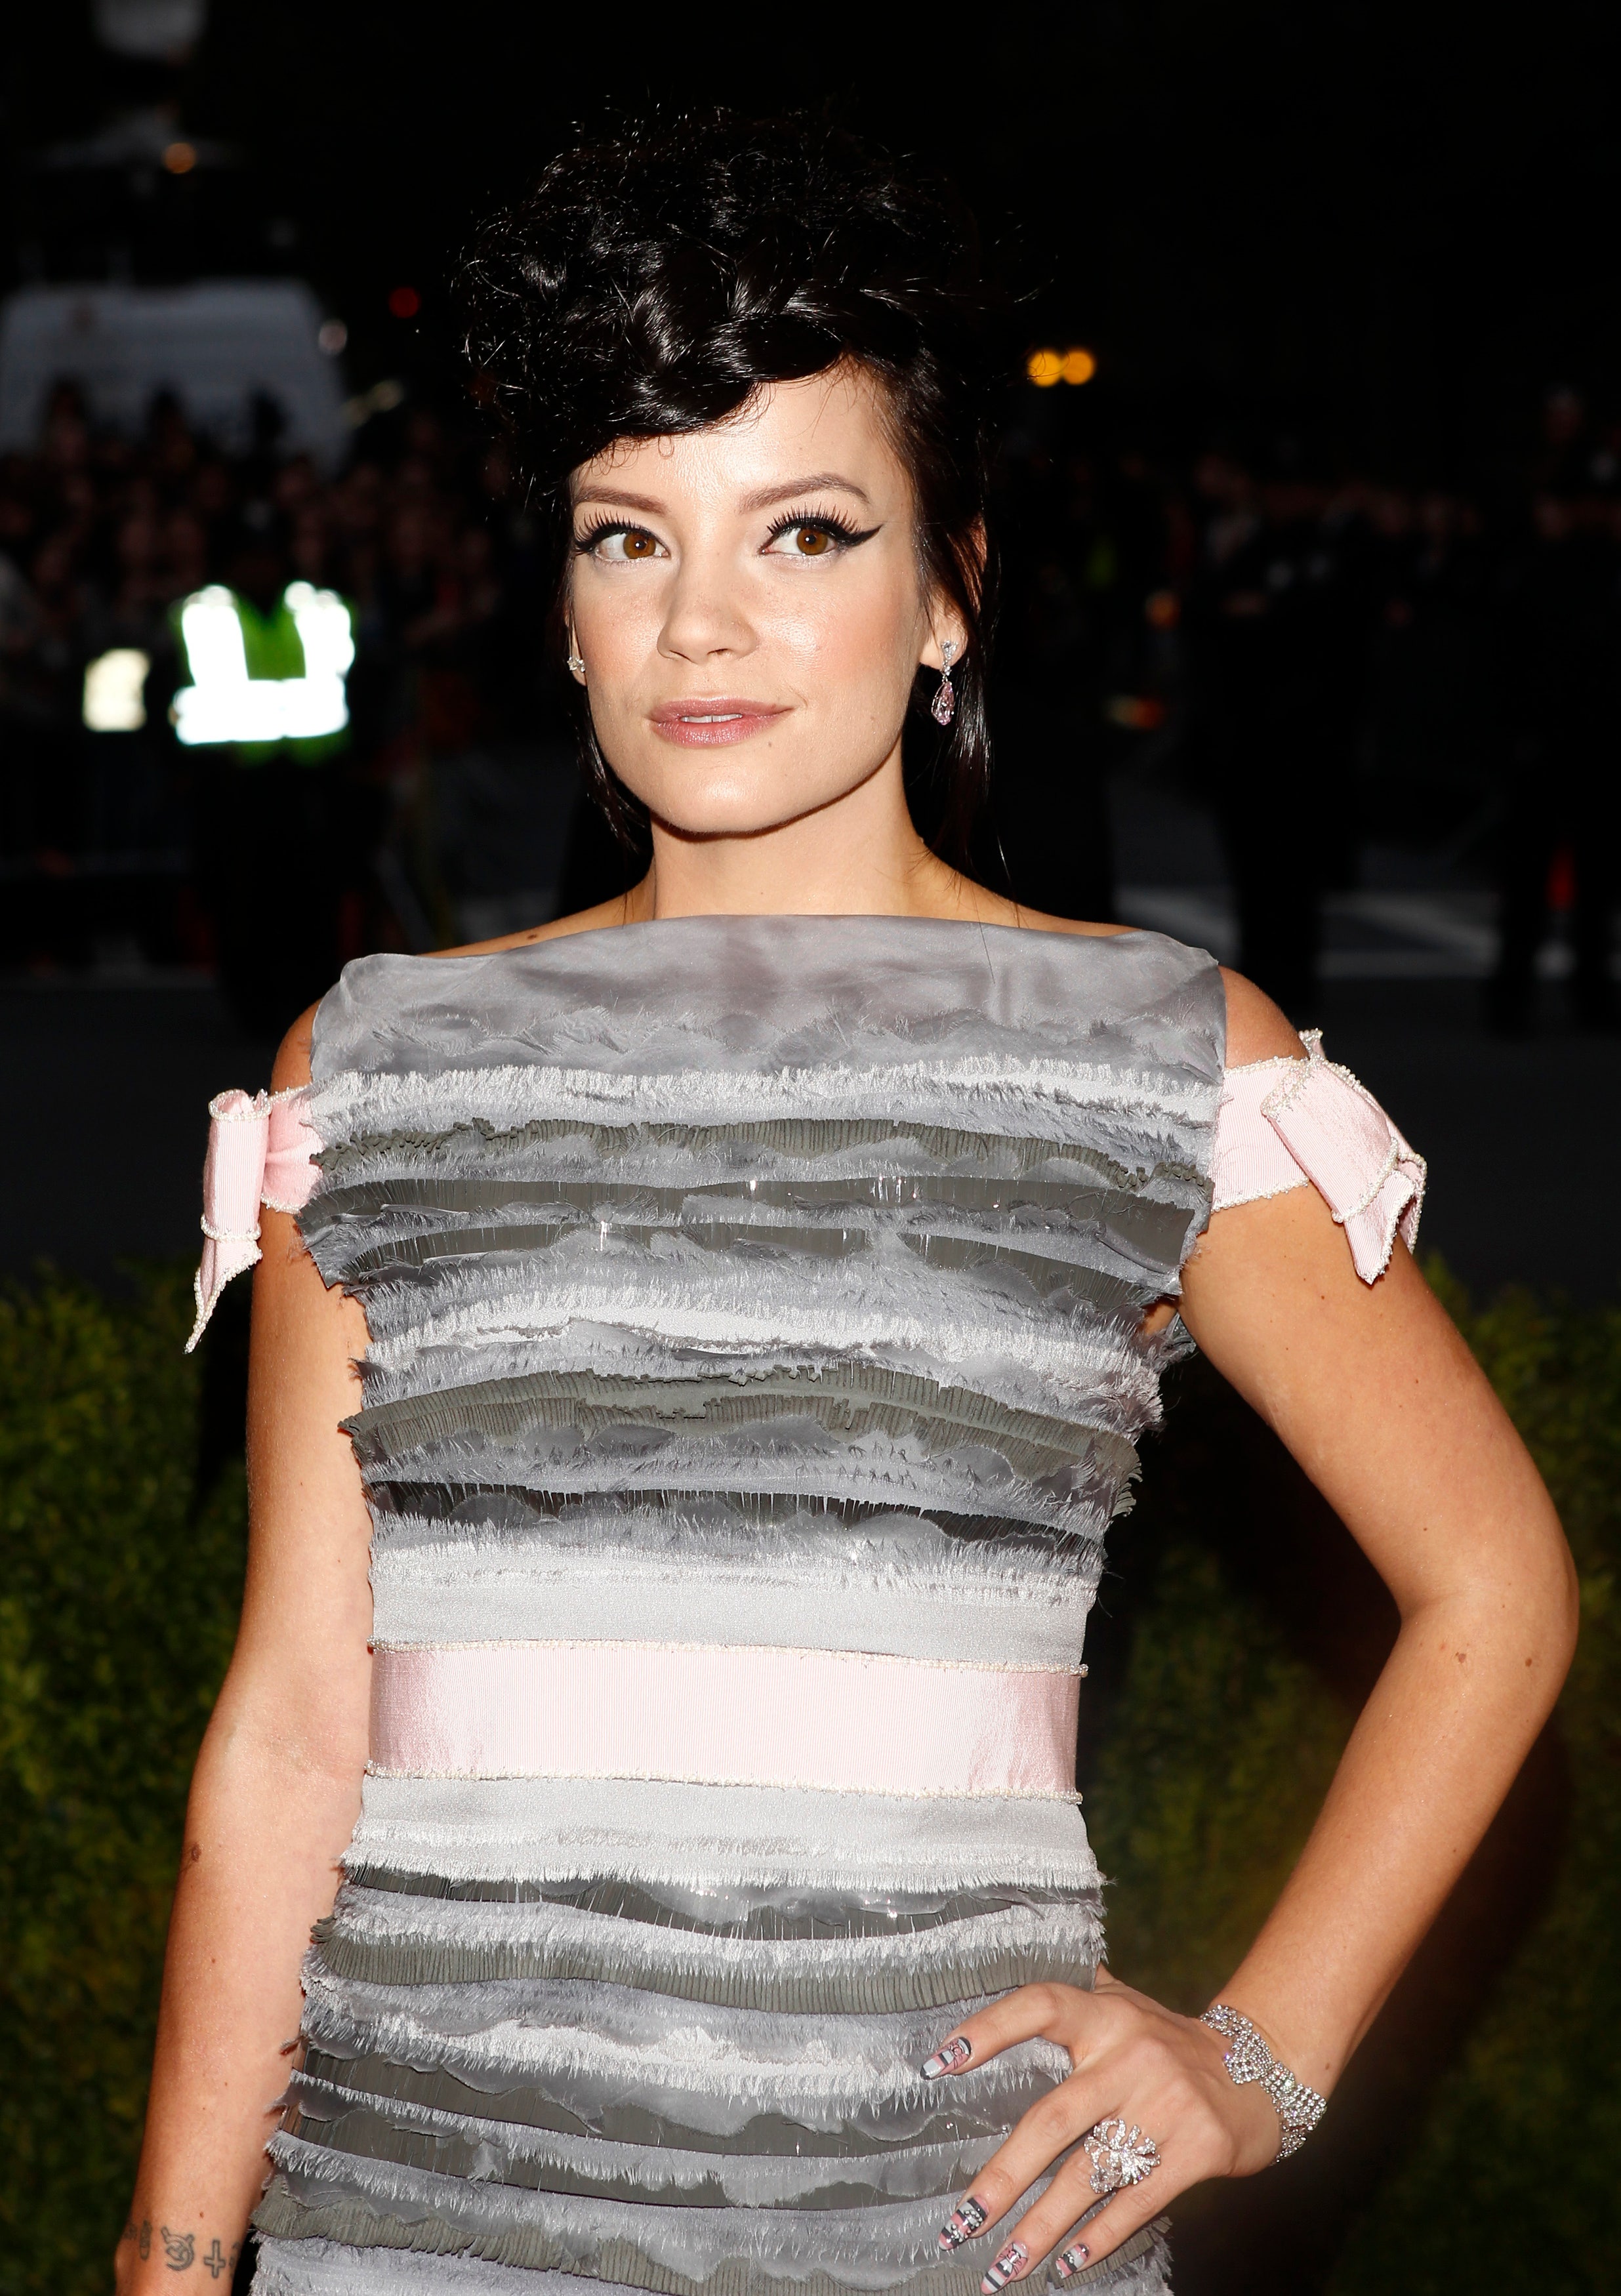 Lily Allen turned down incestuous 'Game of Thrones' role | Fox News